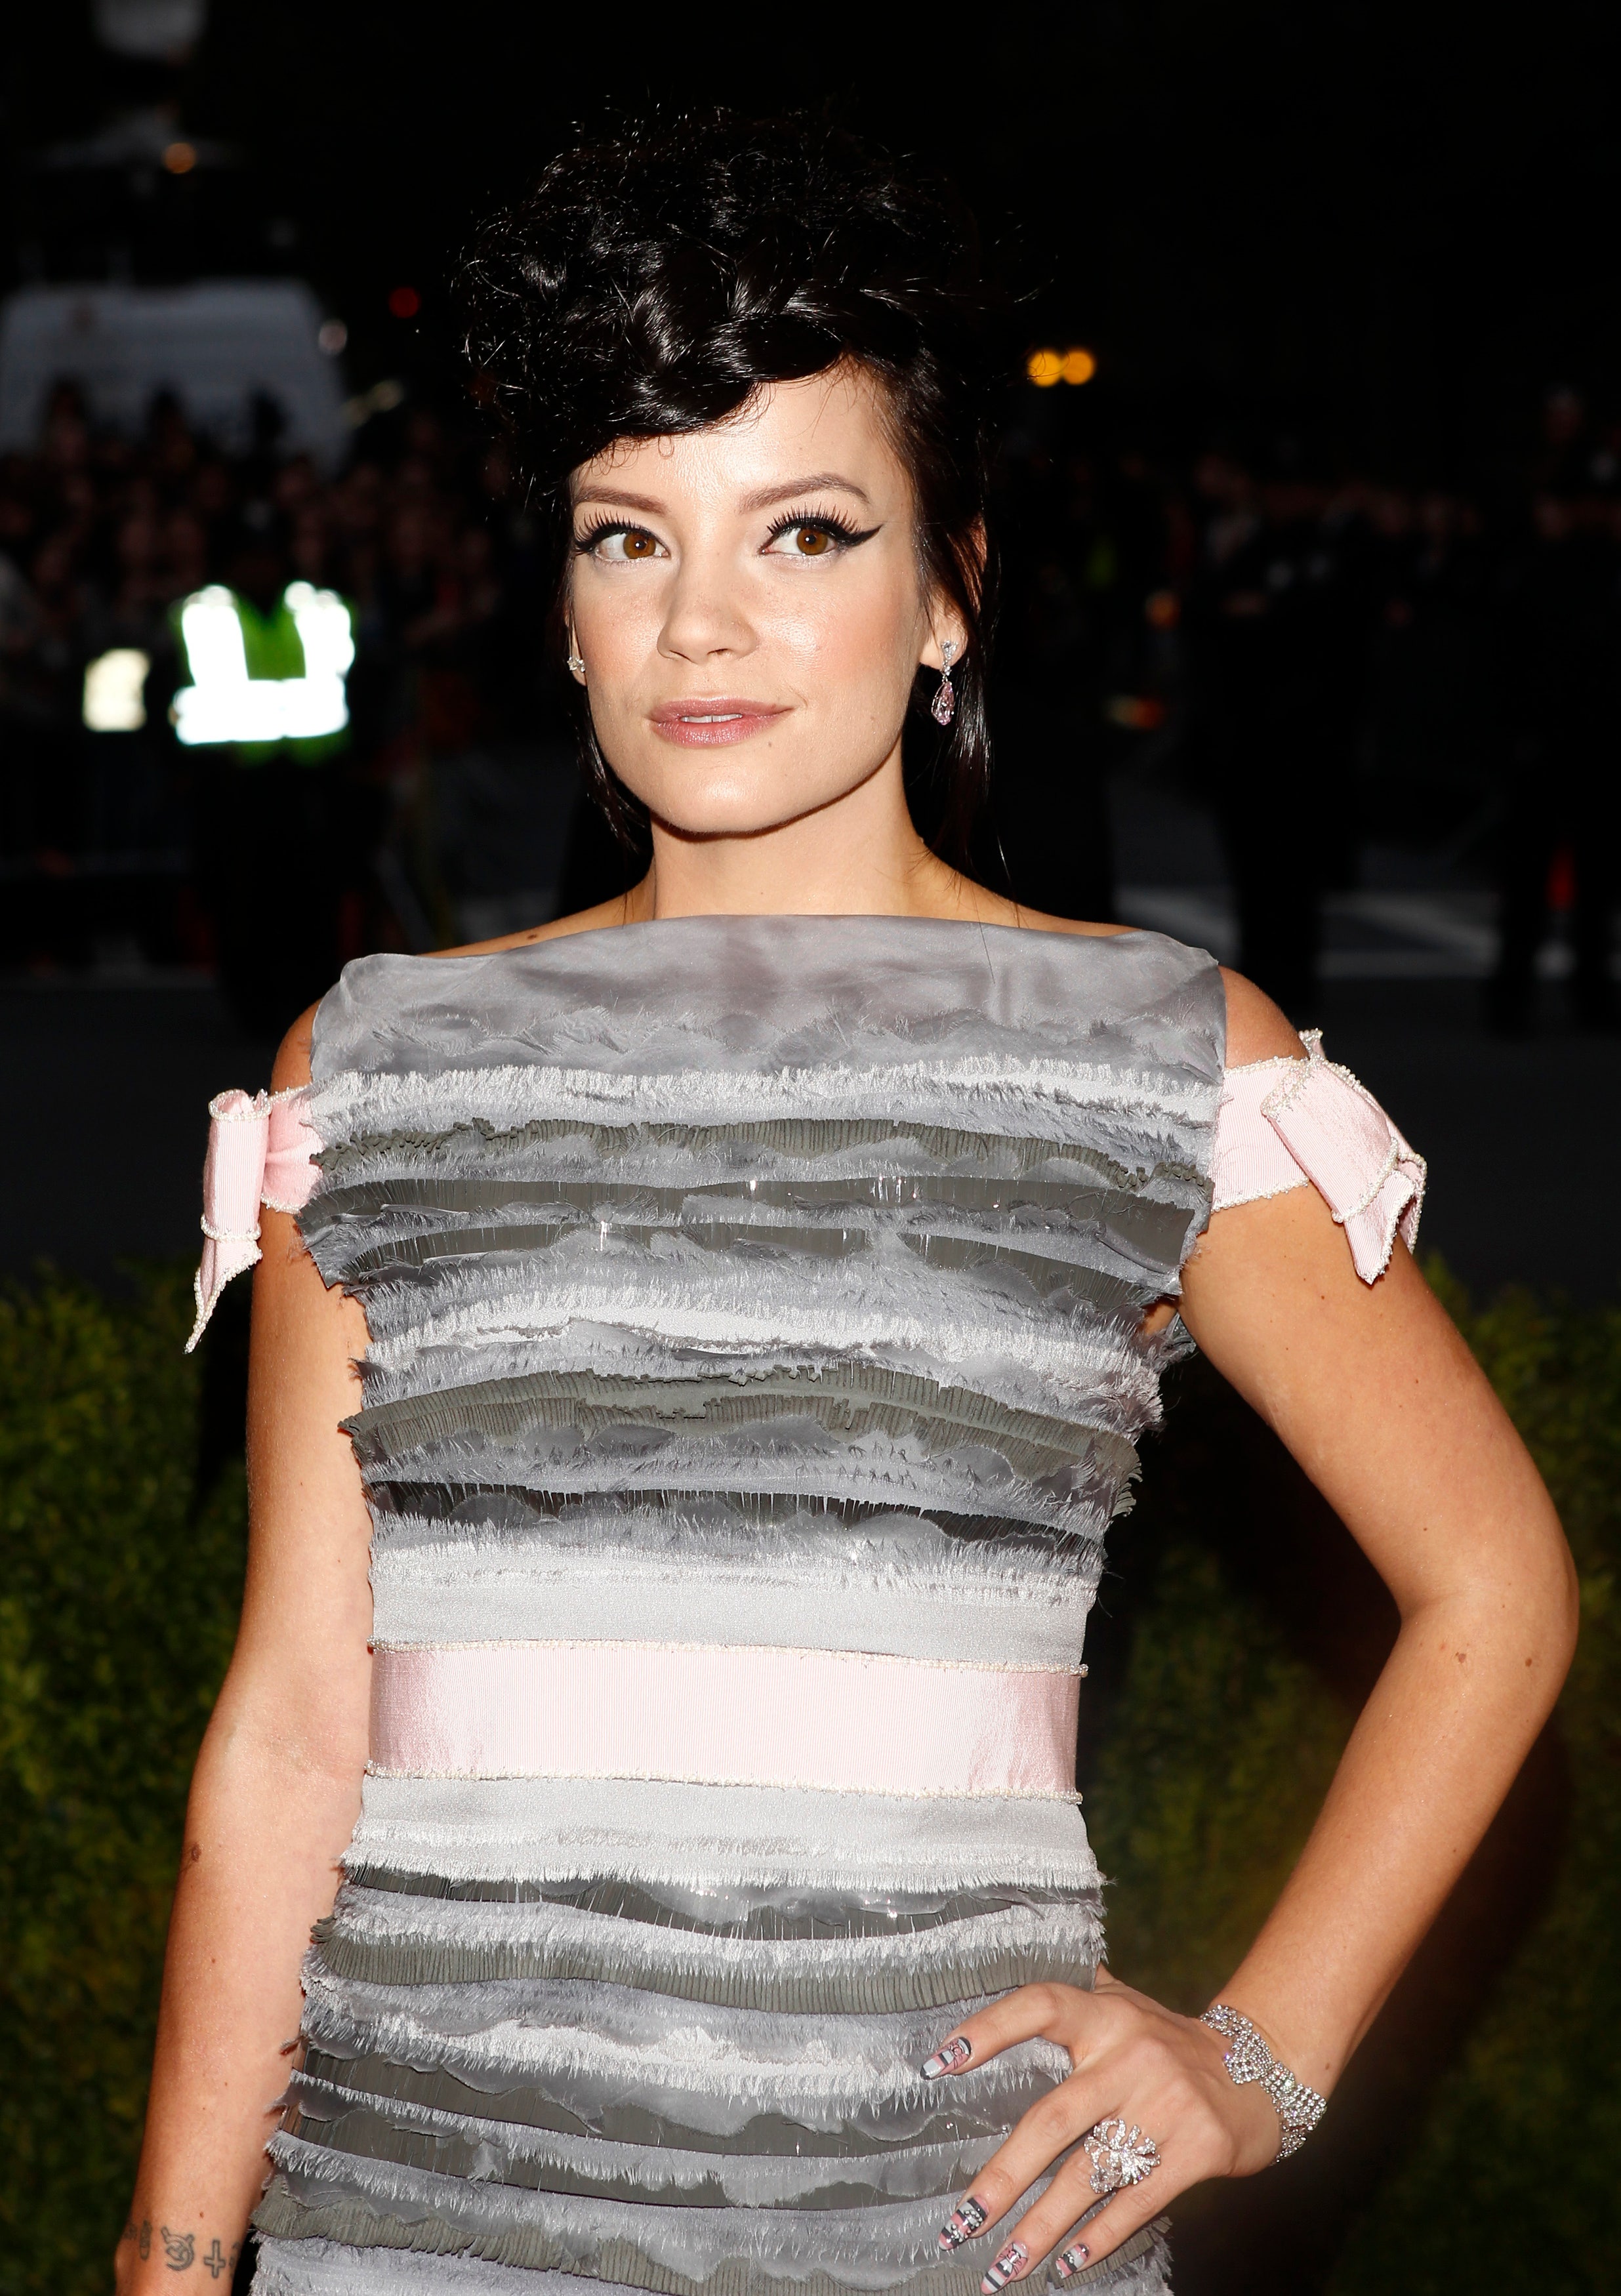 Lily Allen turned down incestuous 'Game of Thrones' role | Fox News